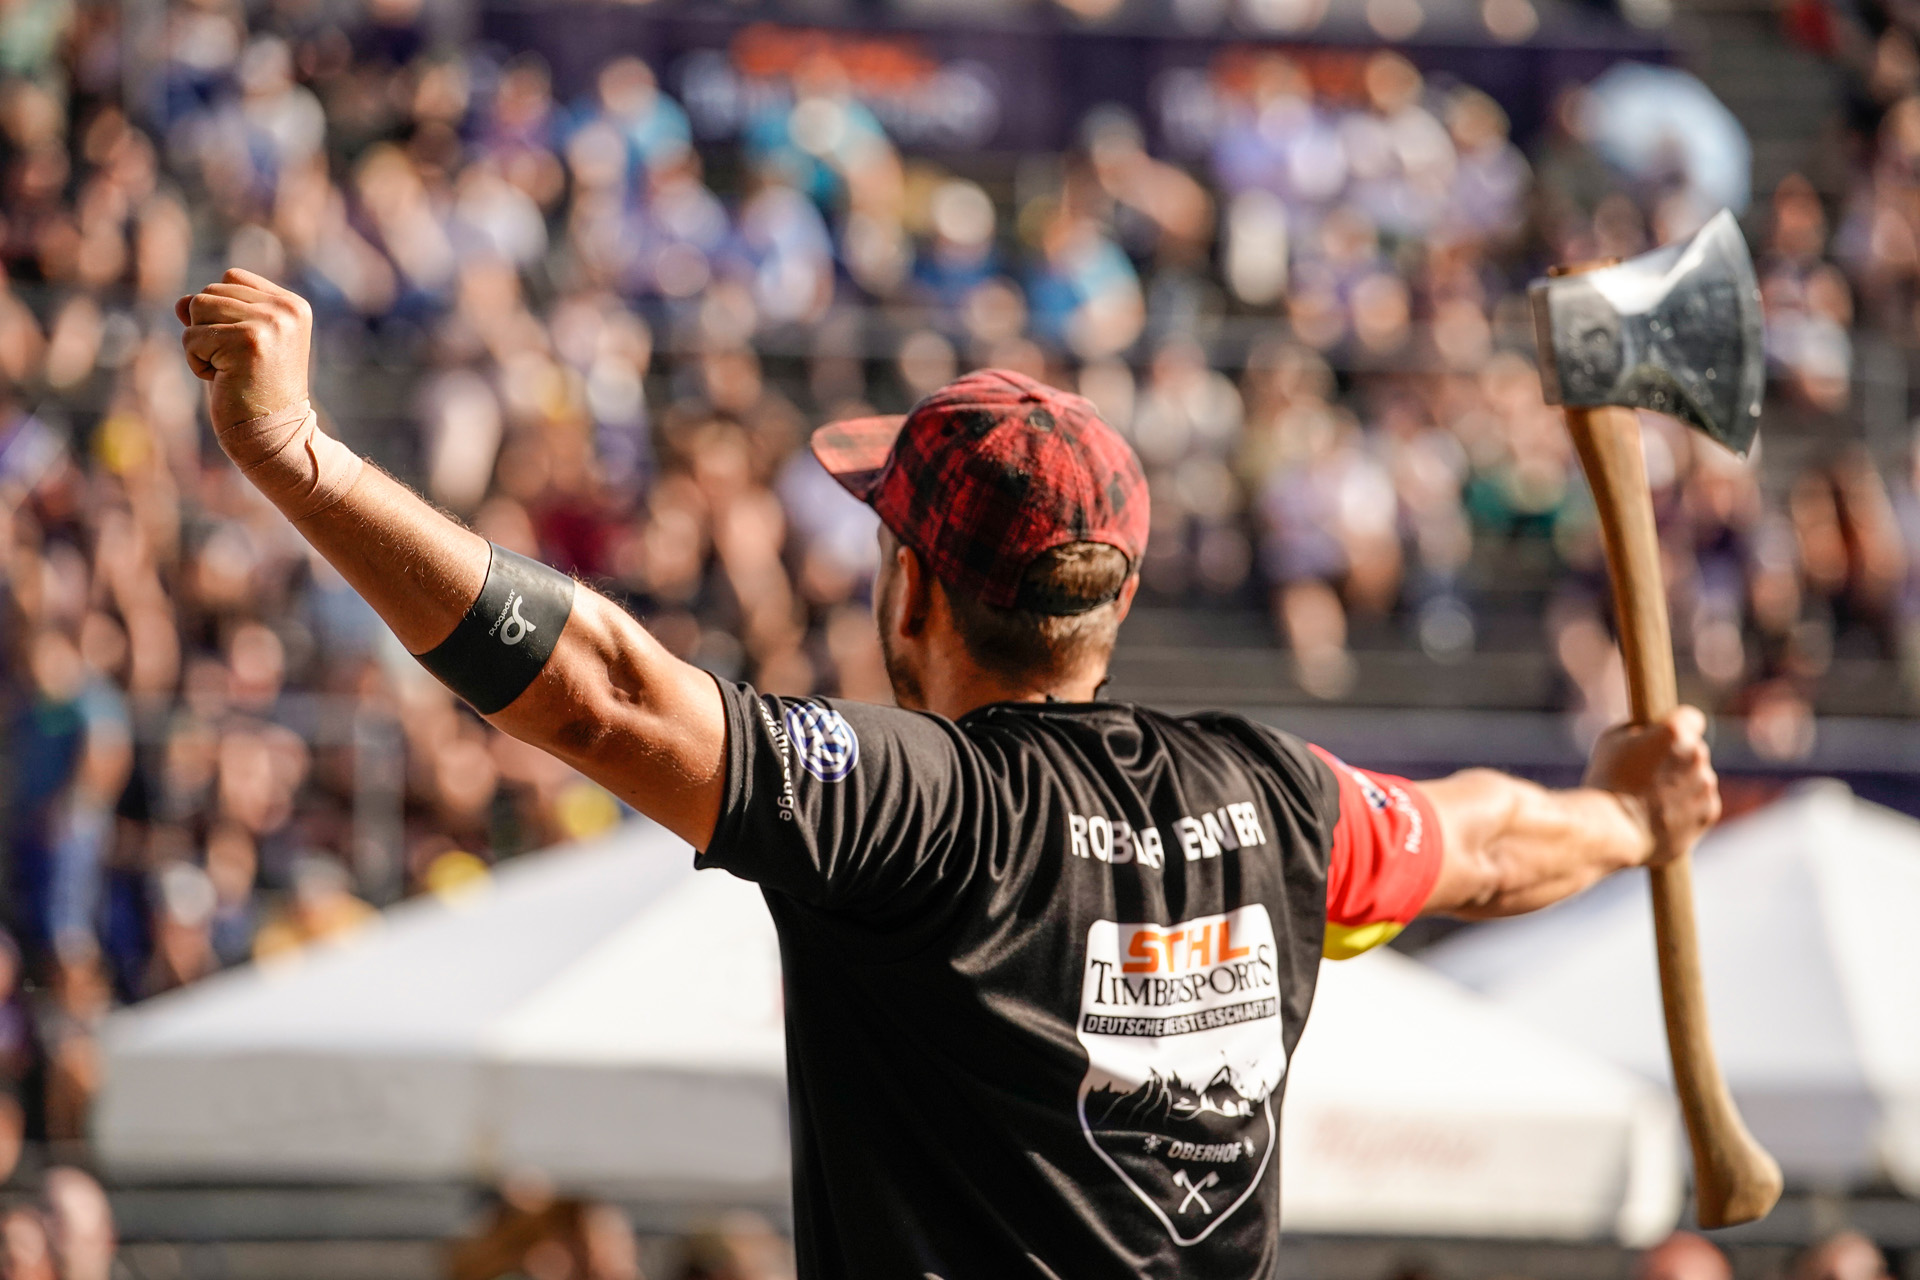 A man celebrates at a Timbersports event